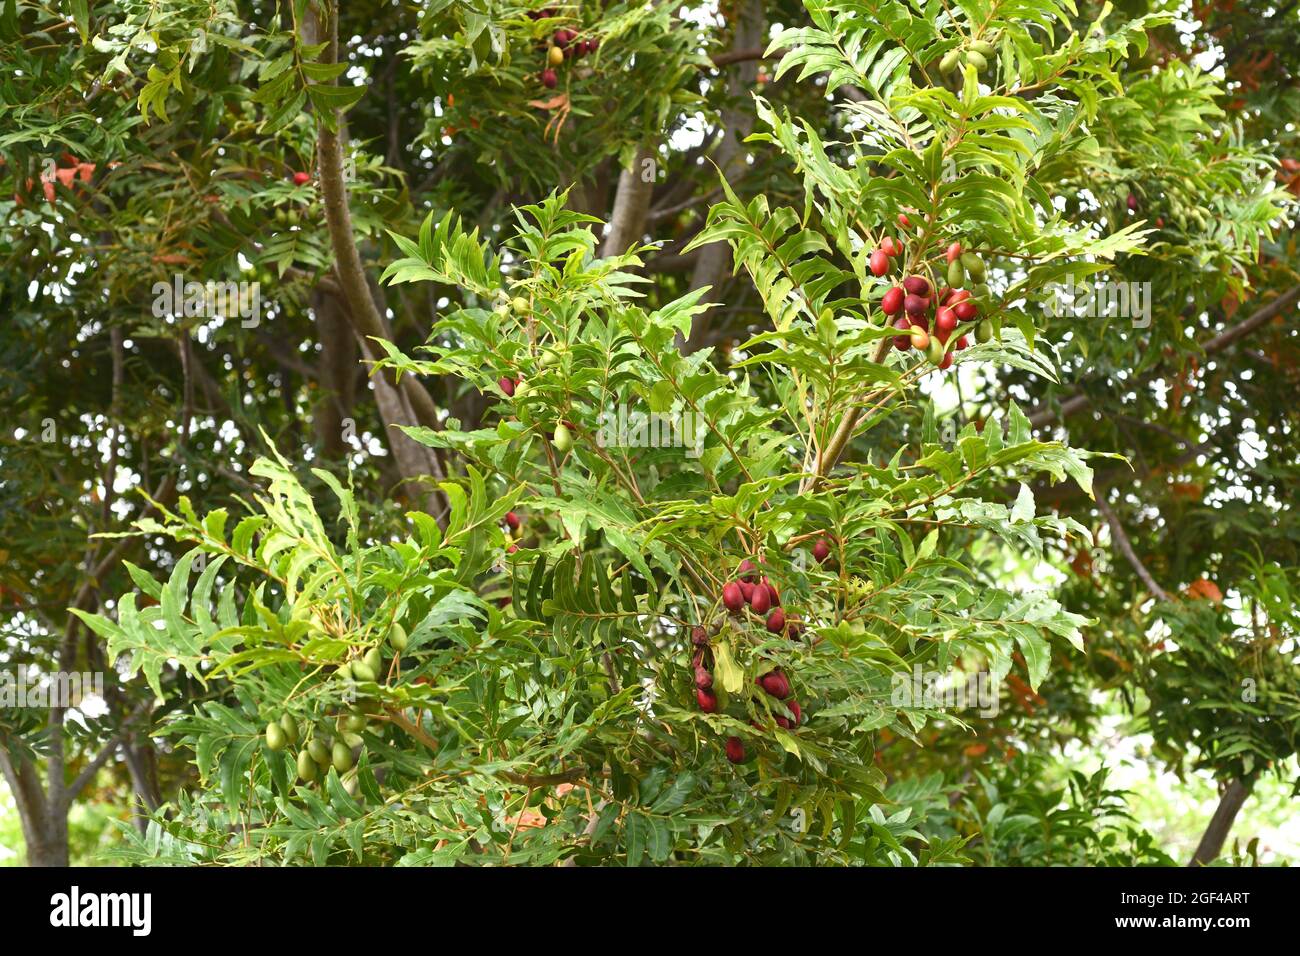 Wild plum or kaffir plum (Harpephyllum caffer) is an evergreen tree native to southern Africa. Its fruits are edible. Stock Photo